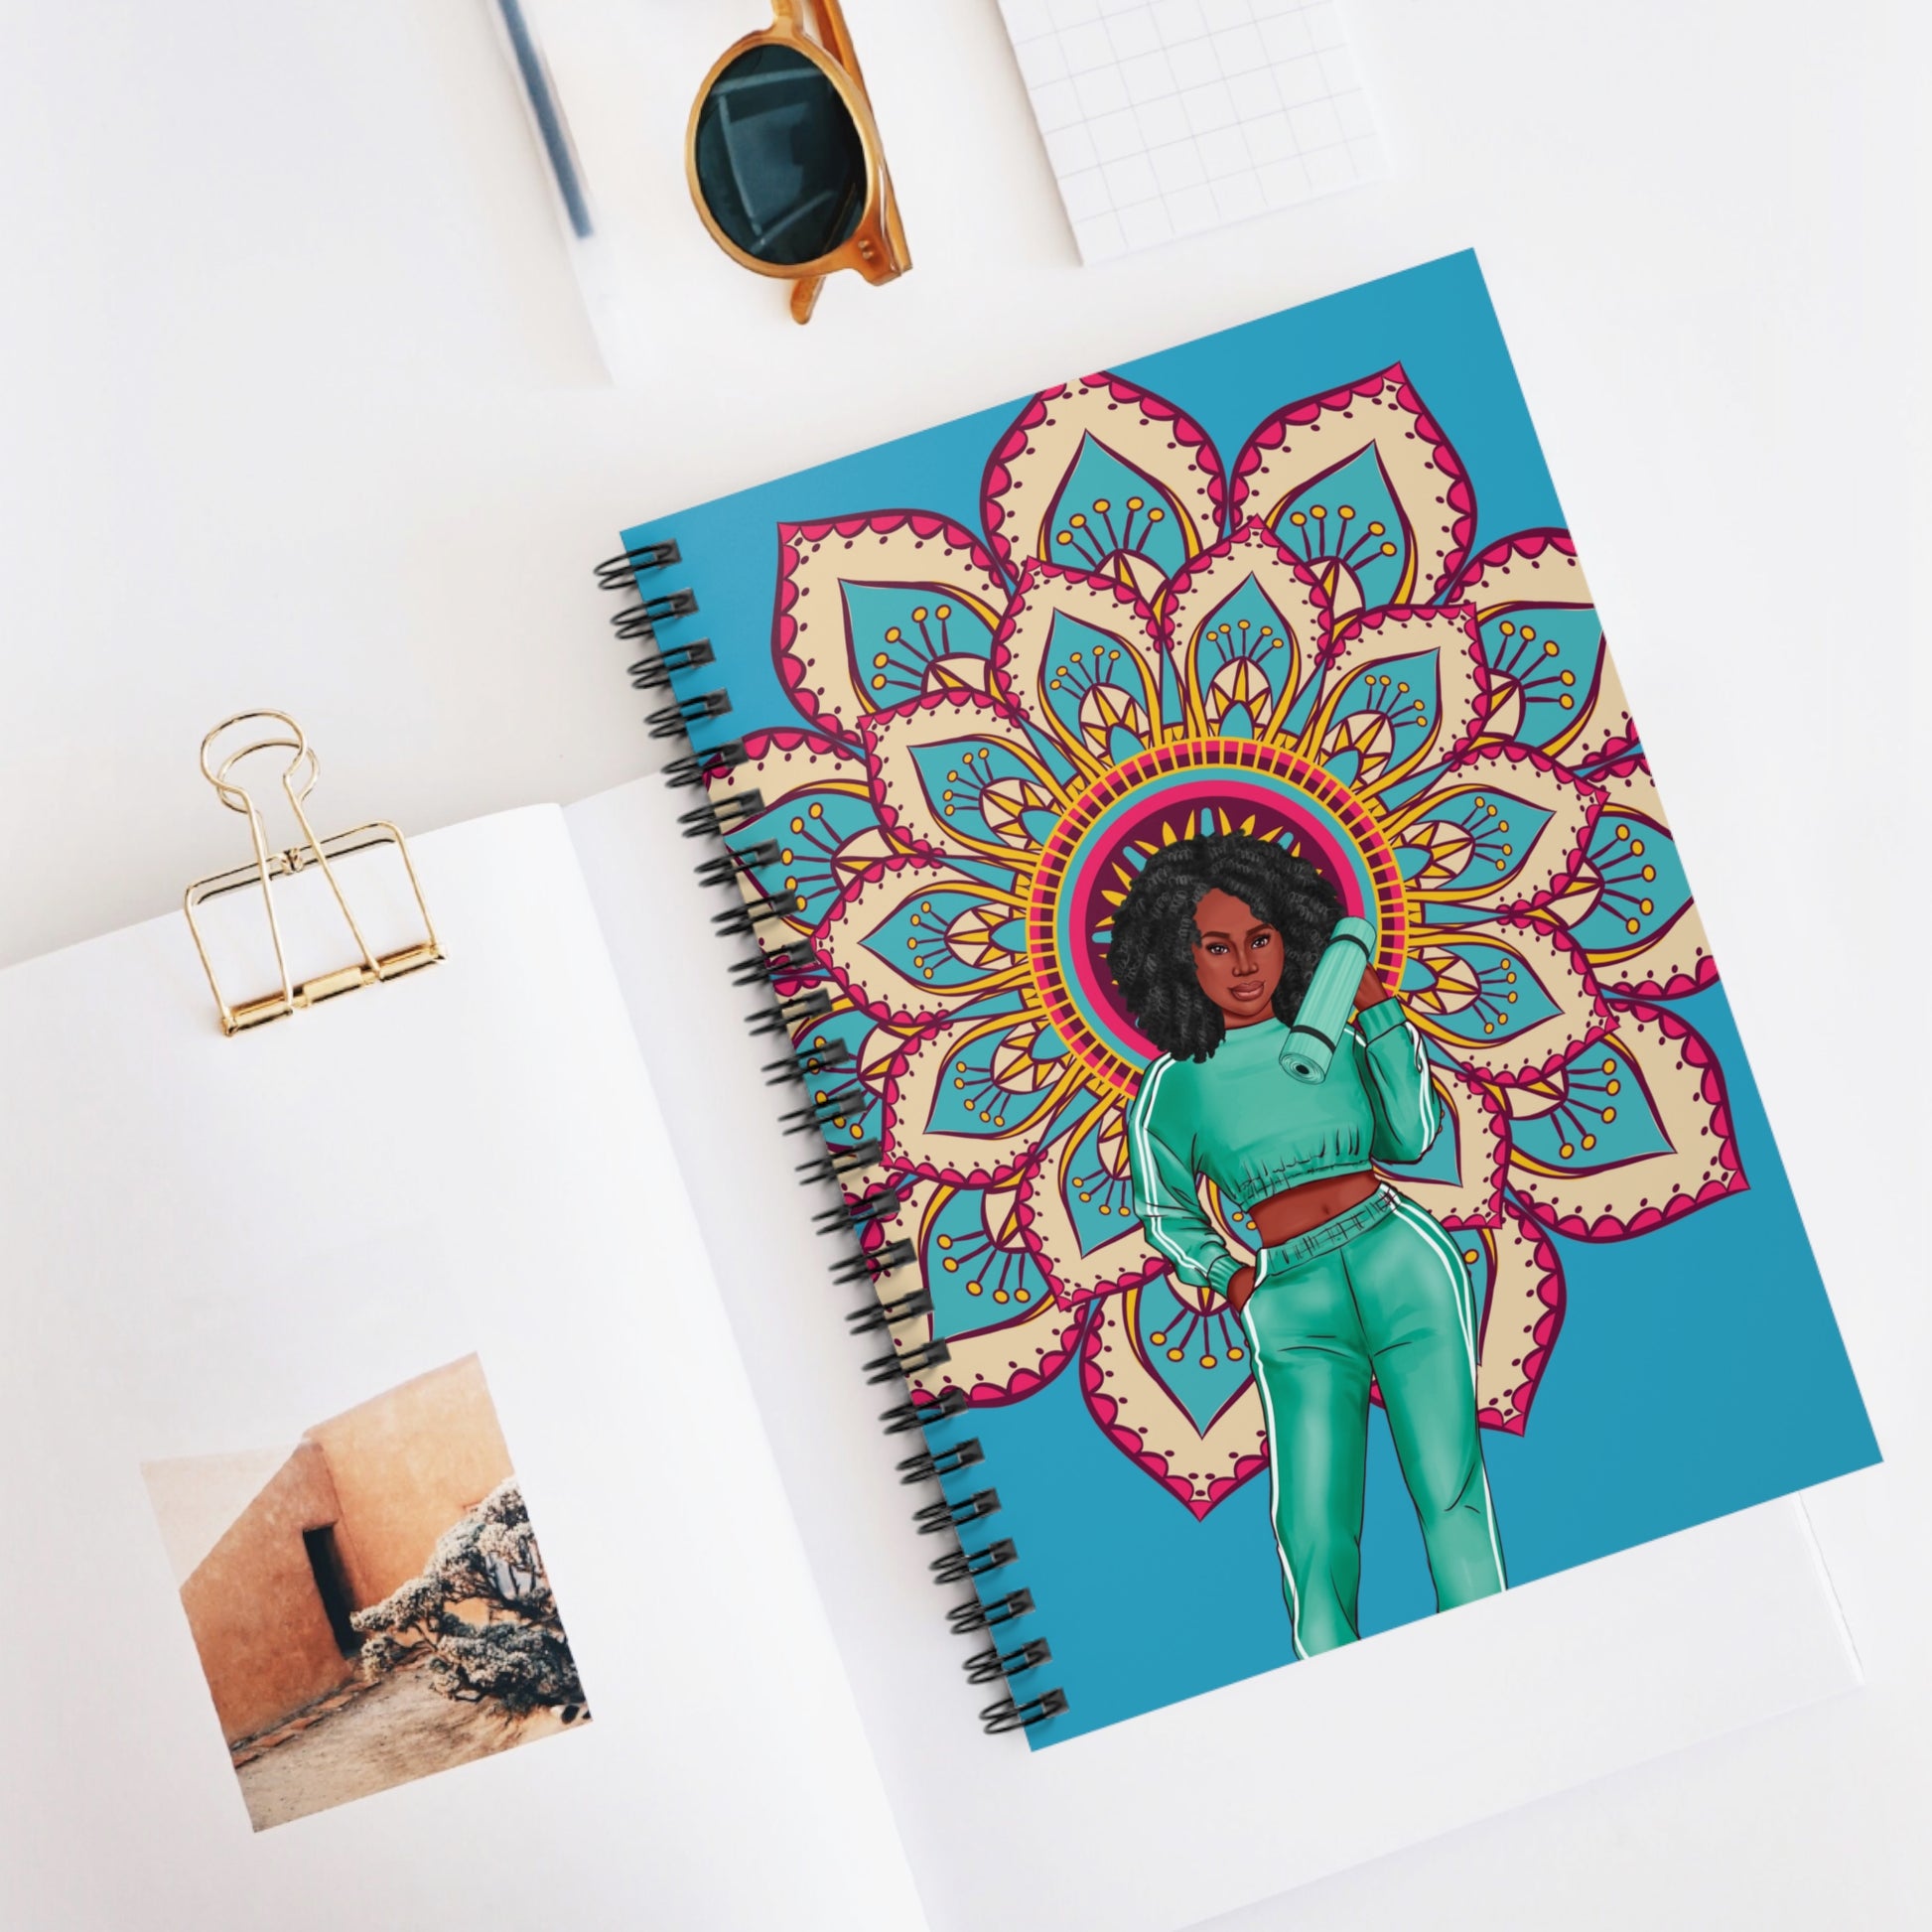 Girl Power: Spiral Notebook - Log Books - Journals - Diaries - and More Custom Printed by TheGlassyLass